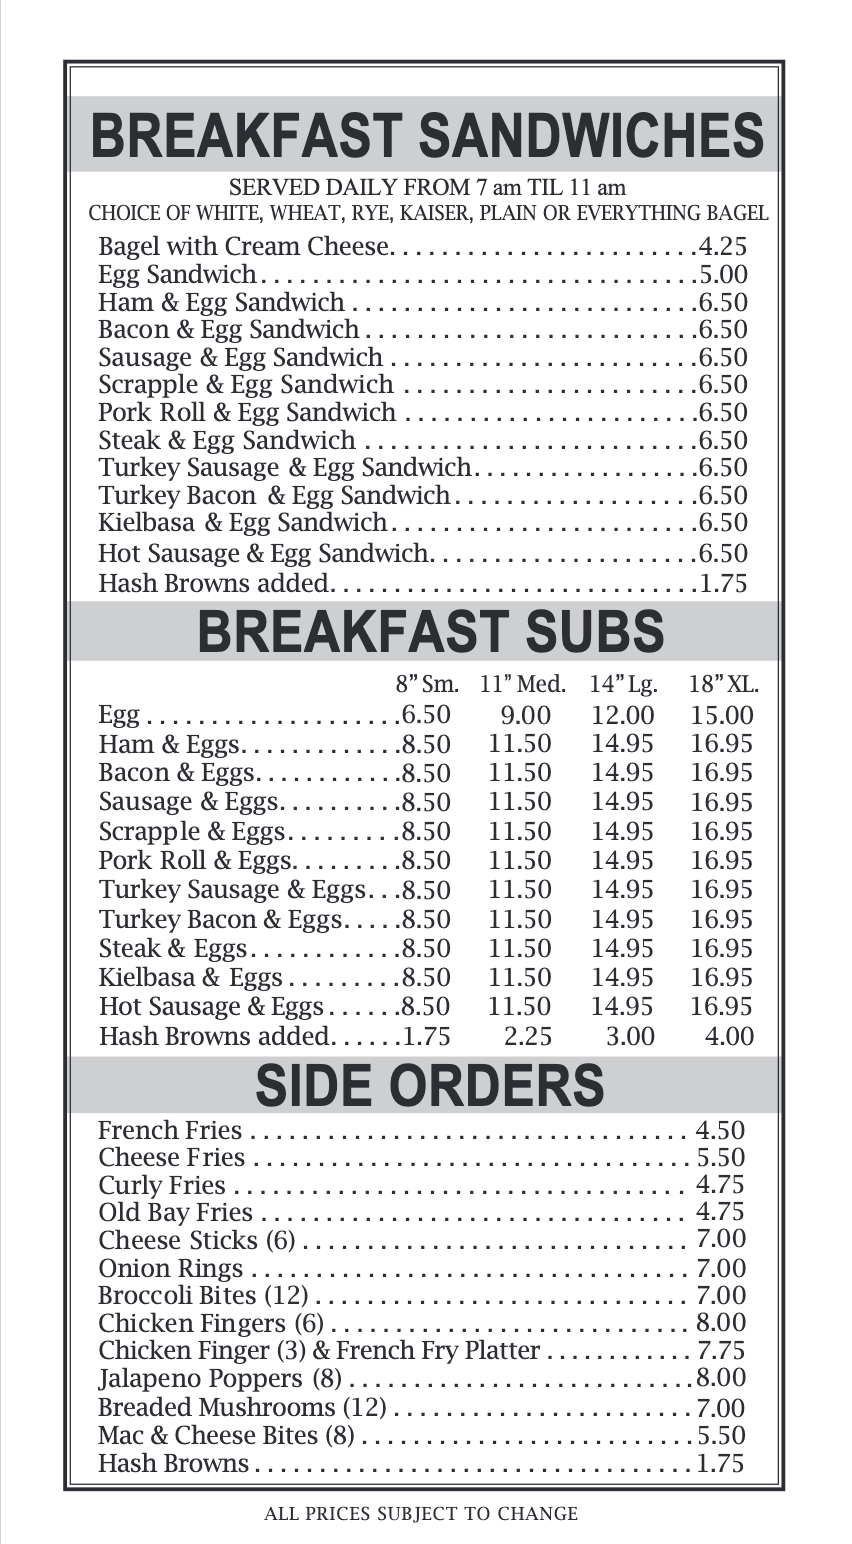 Breakfast Sandwiches, Breakfast Subs and Side Orders